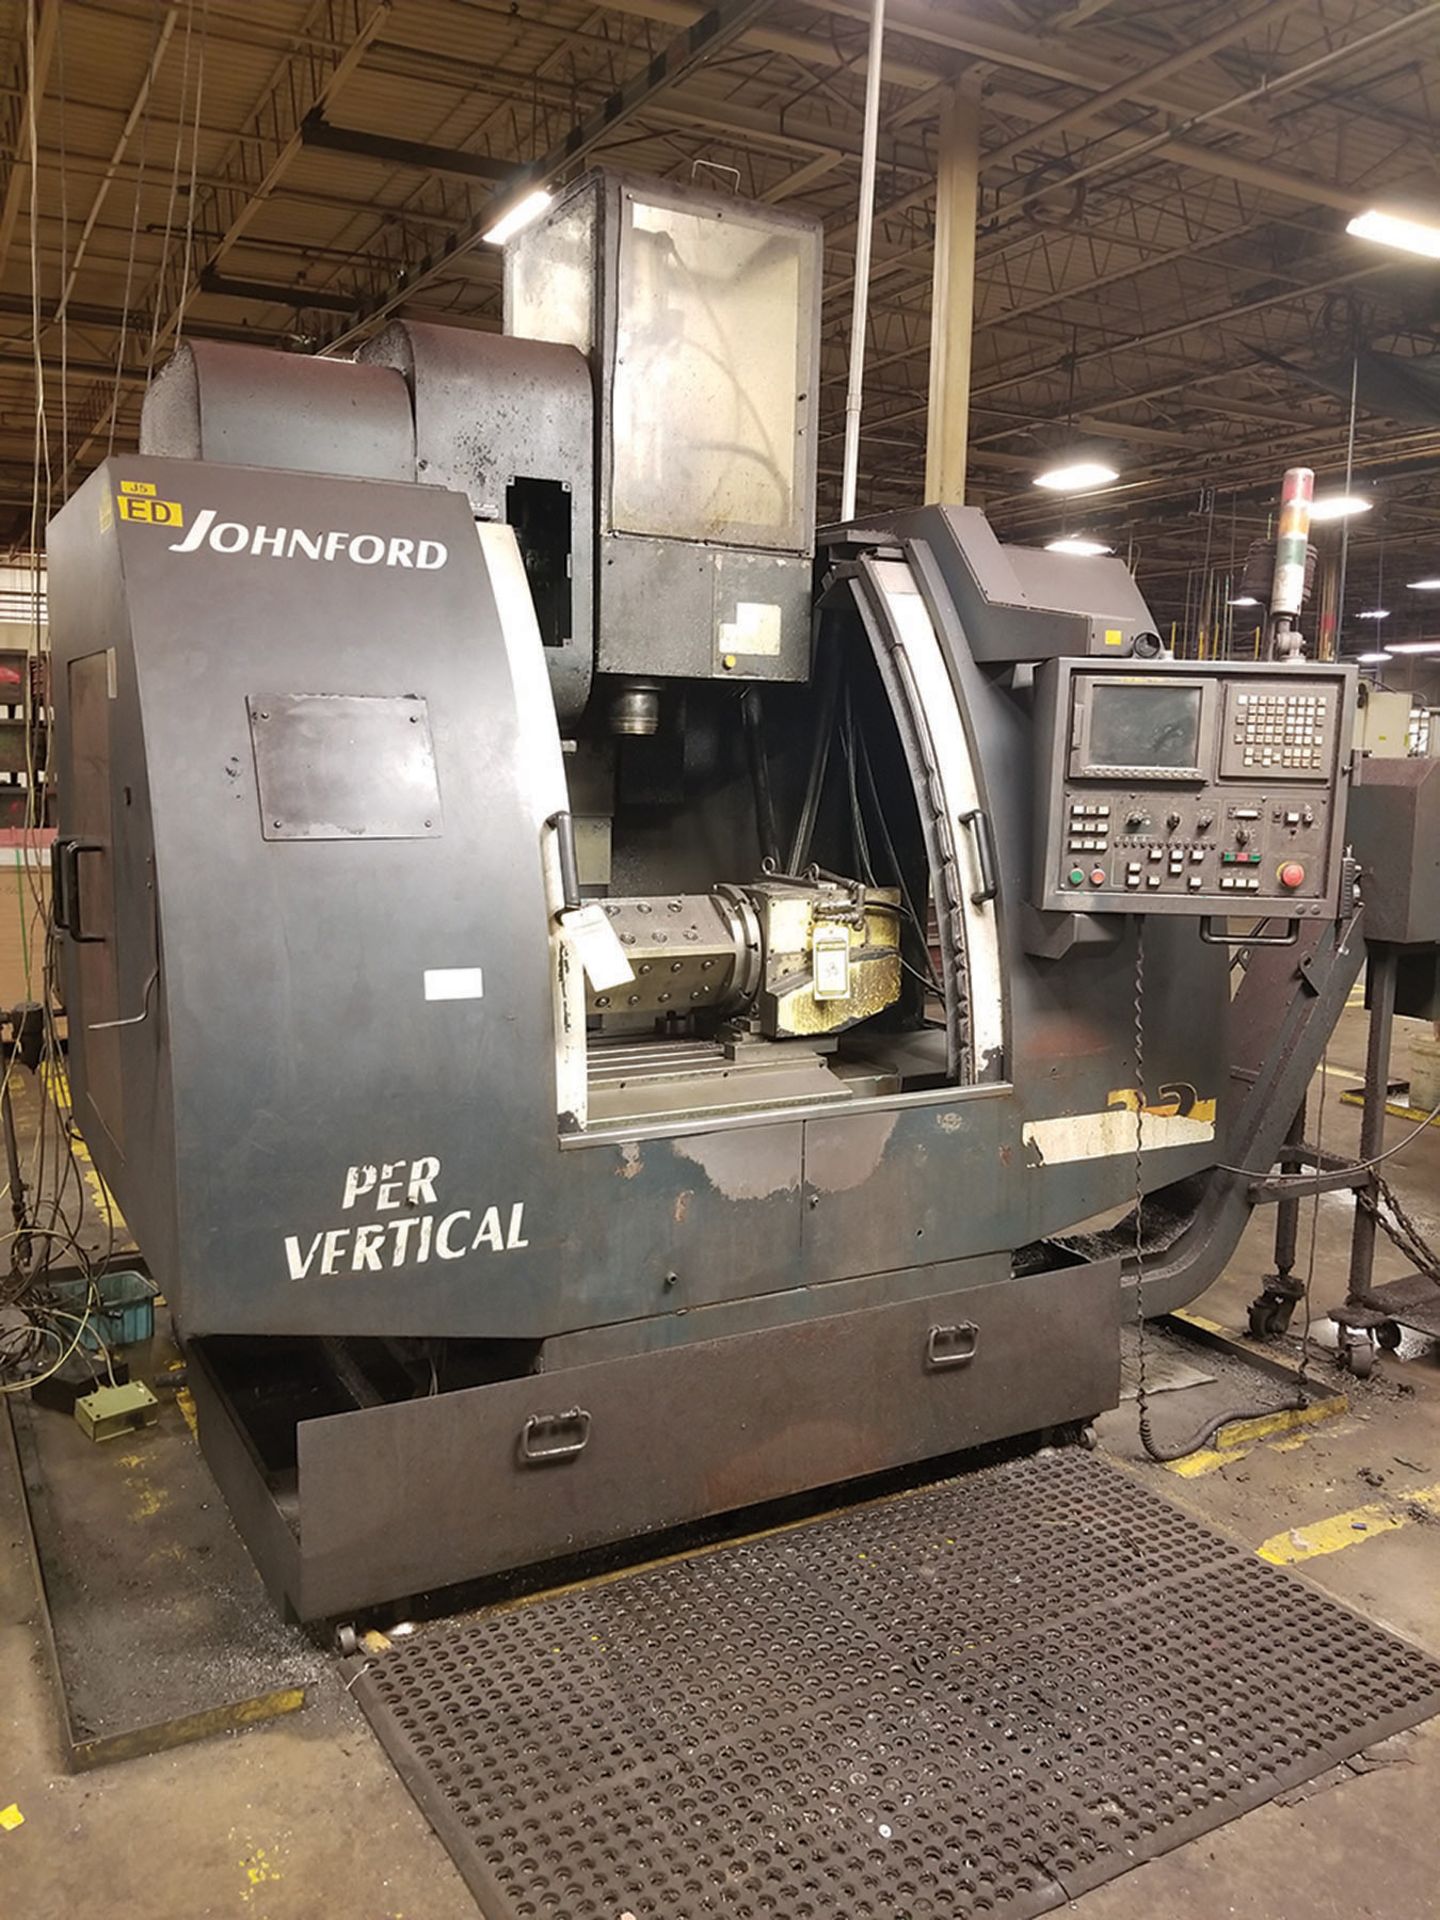 2003 JOHNFORD SUPER VERTICAL SV-32 VERTICAL MACHINING CENTER, 4-AXIS, S/N MB2302, 17.5'' X 39.25'' - Image 2 of 6